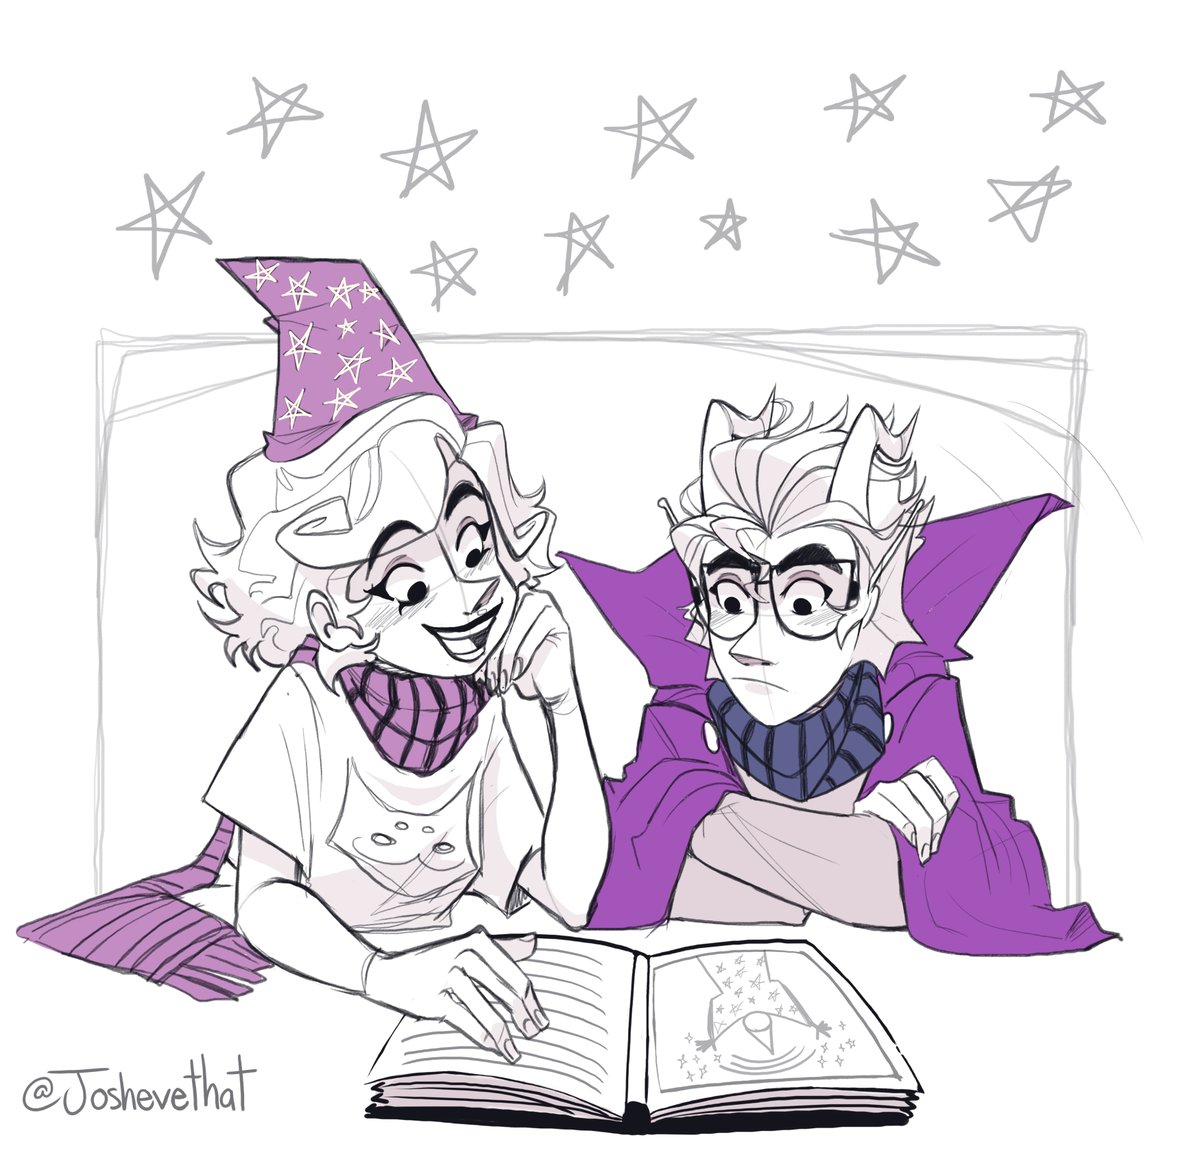 for irrational reasons I did not upload them (4/???)
I'm going to start the year with this!
#Homestuck #home22tuck #roxylalonde #eridanampora